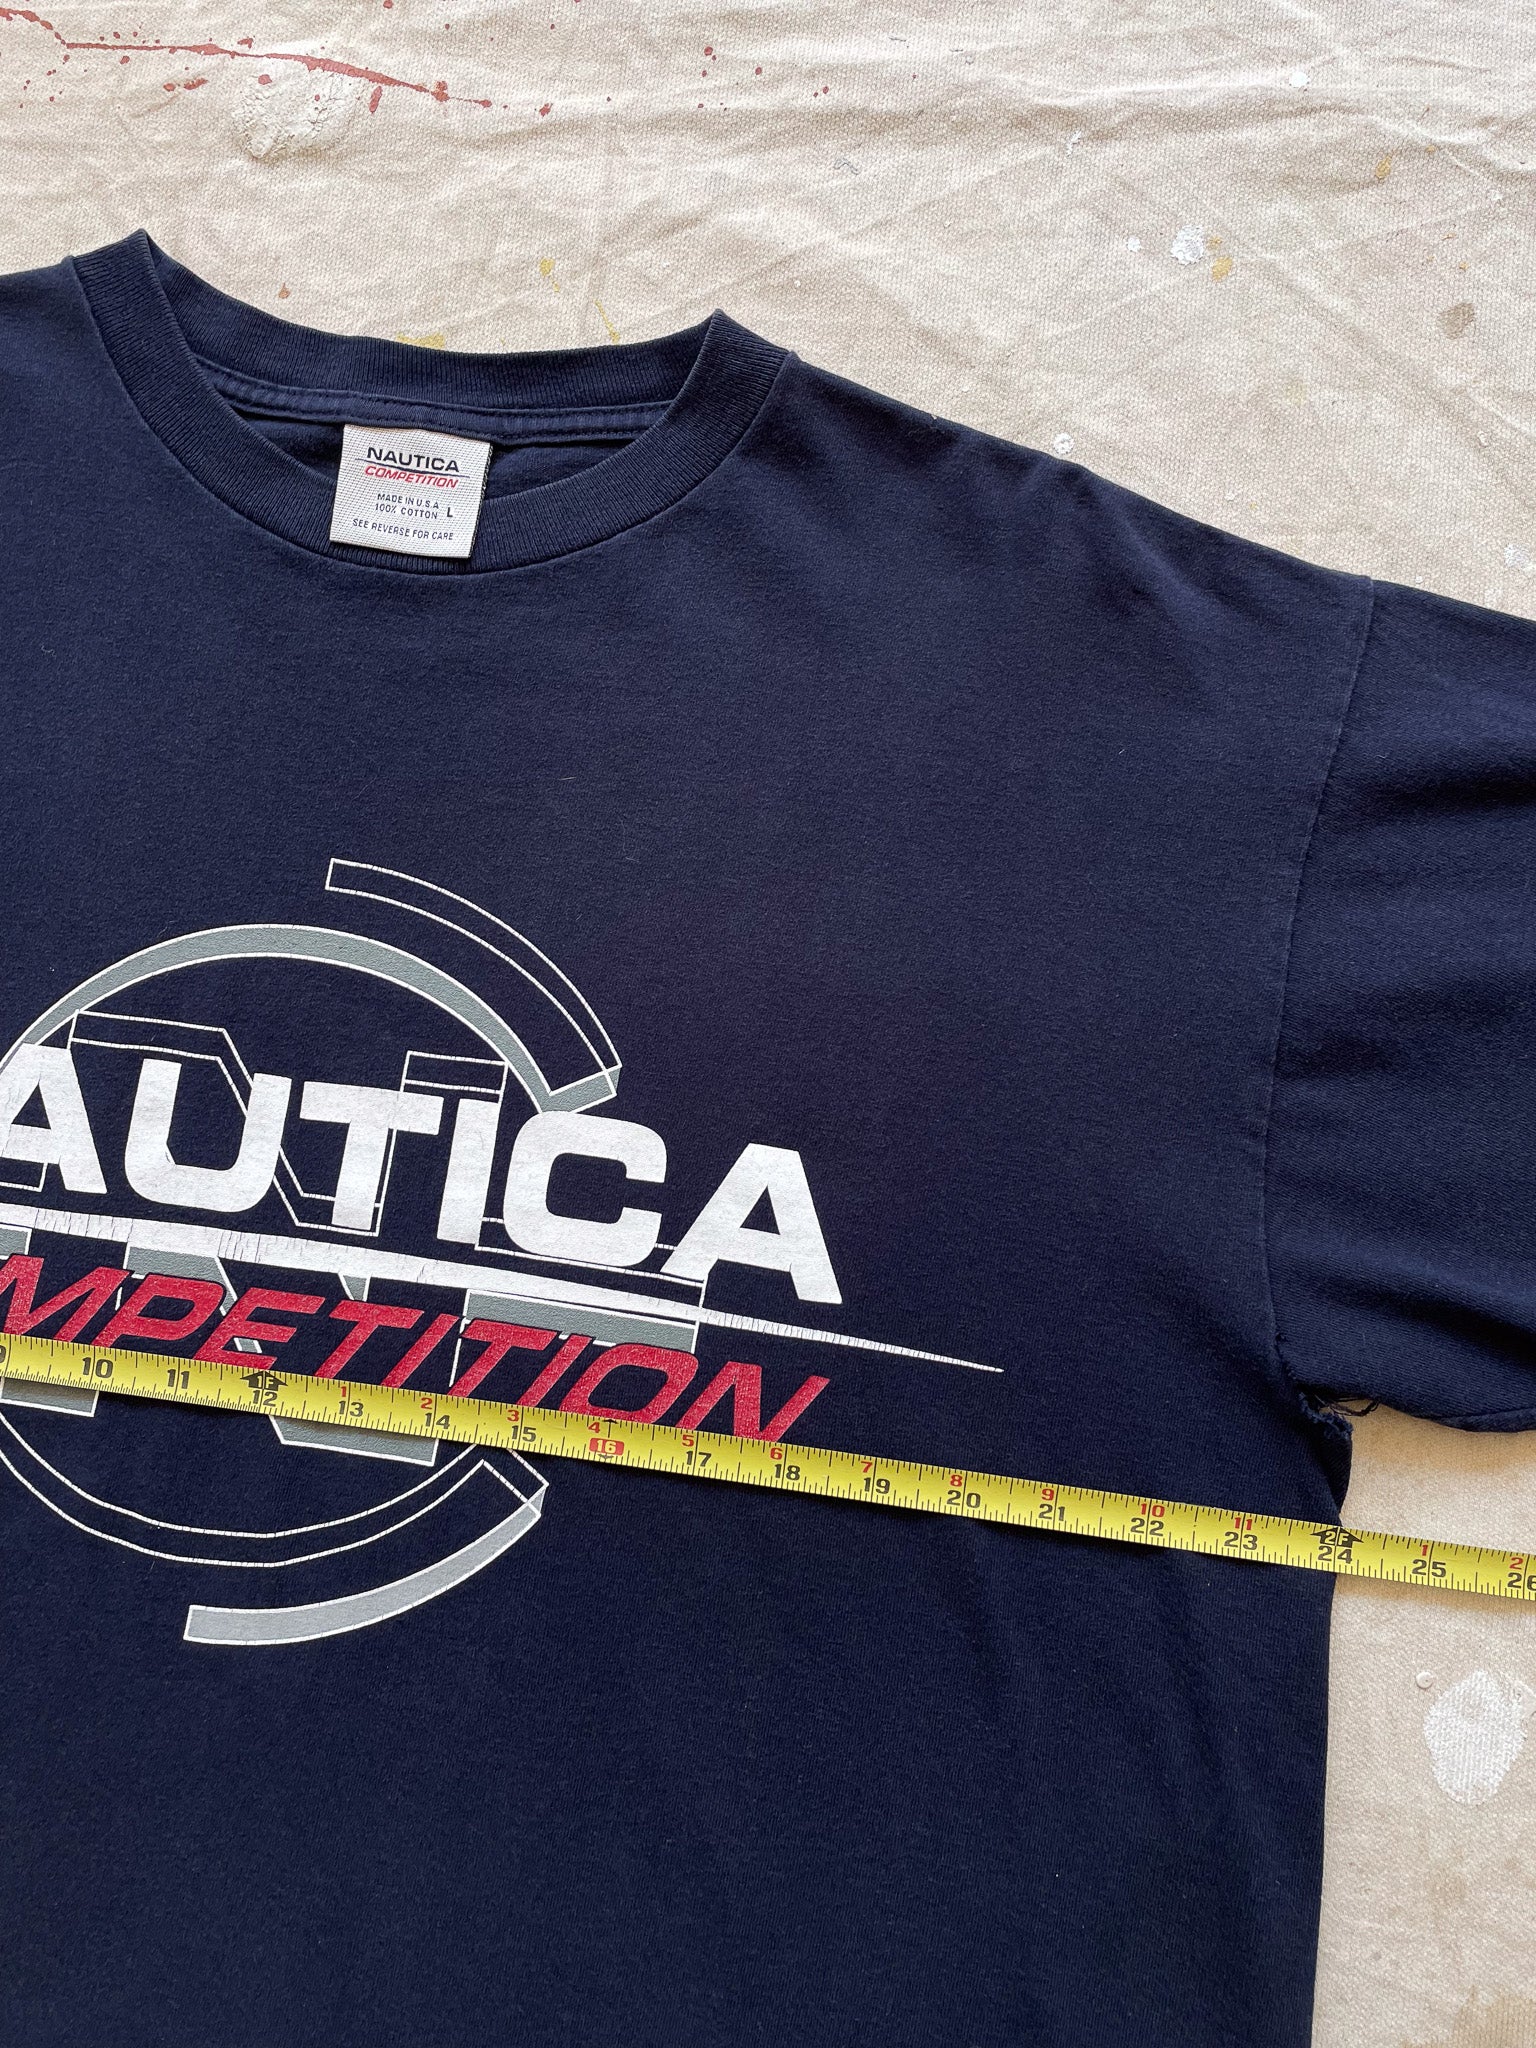 Nautica Competition - out story. The History of the brand.